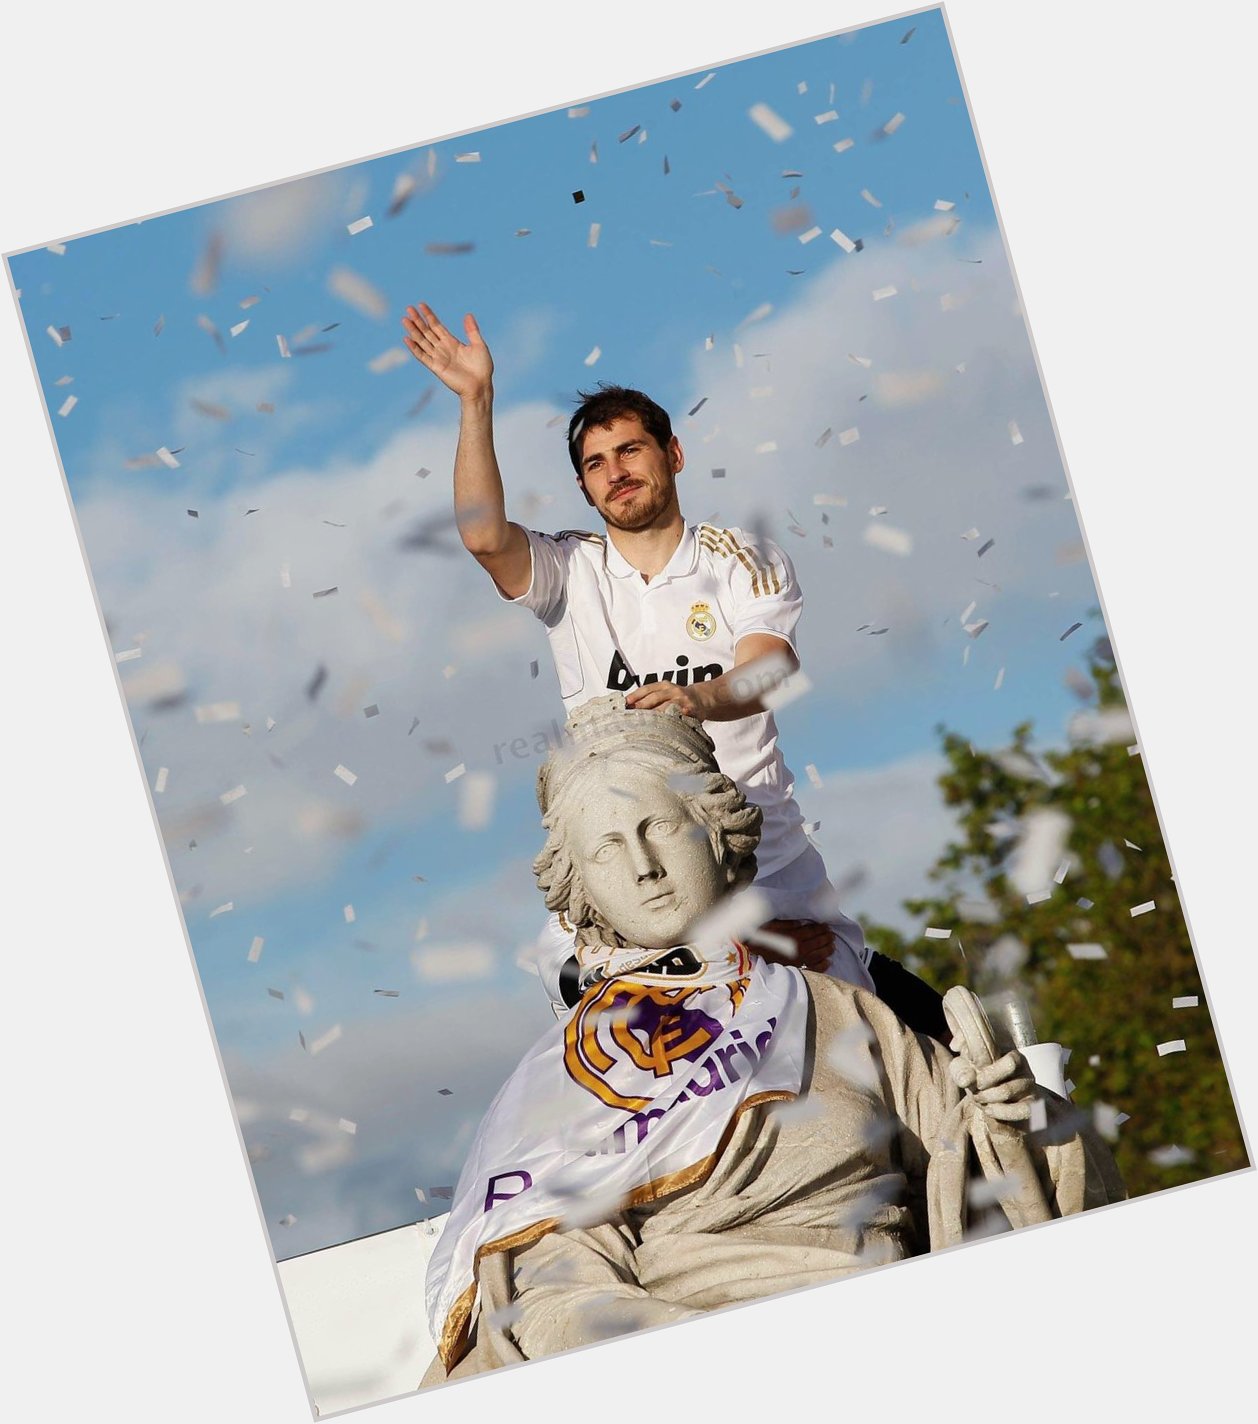 Happy birthday to our eternal captain, Iker Casillas! 
A true Madridista, who bleeds for Real Madrid! 